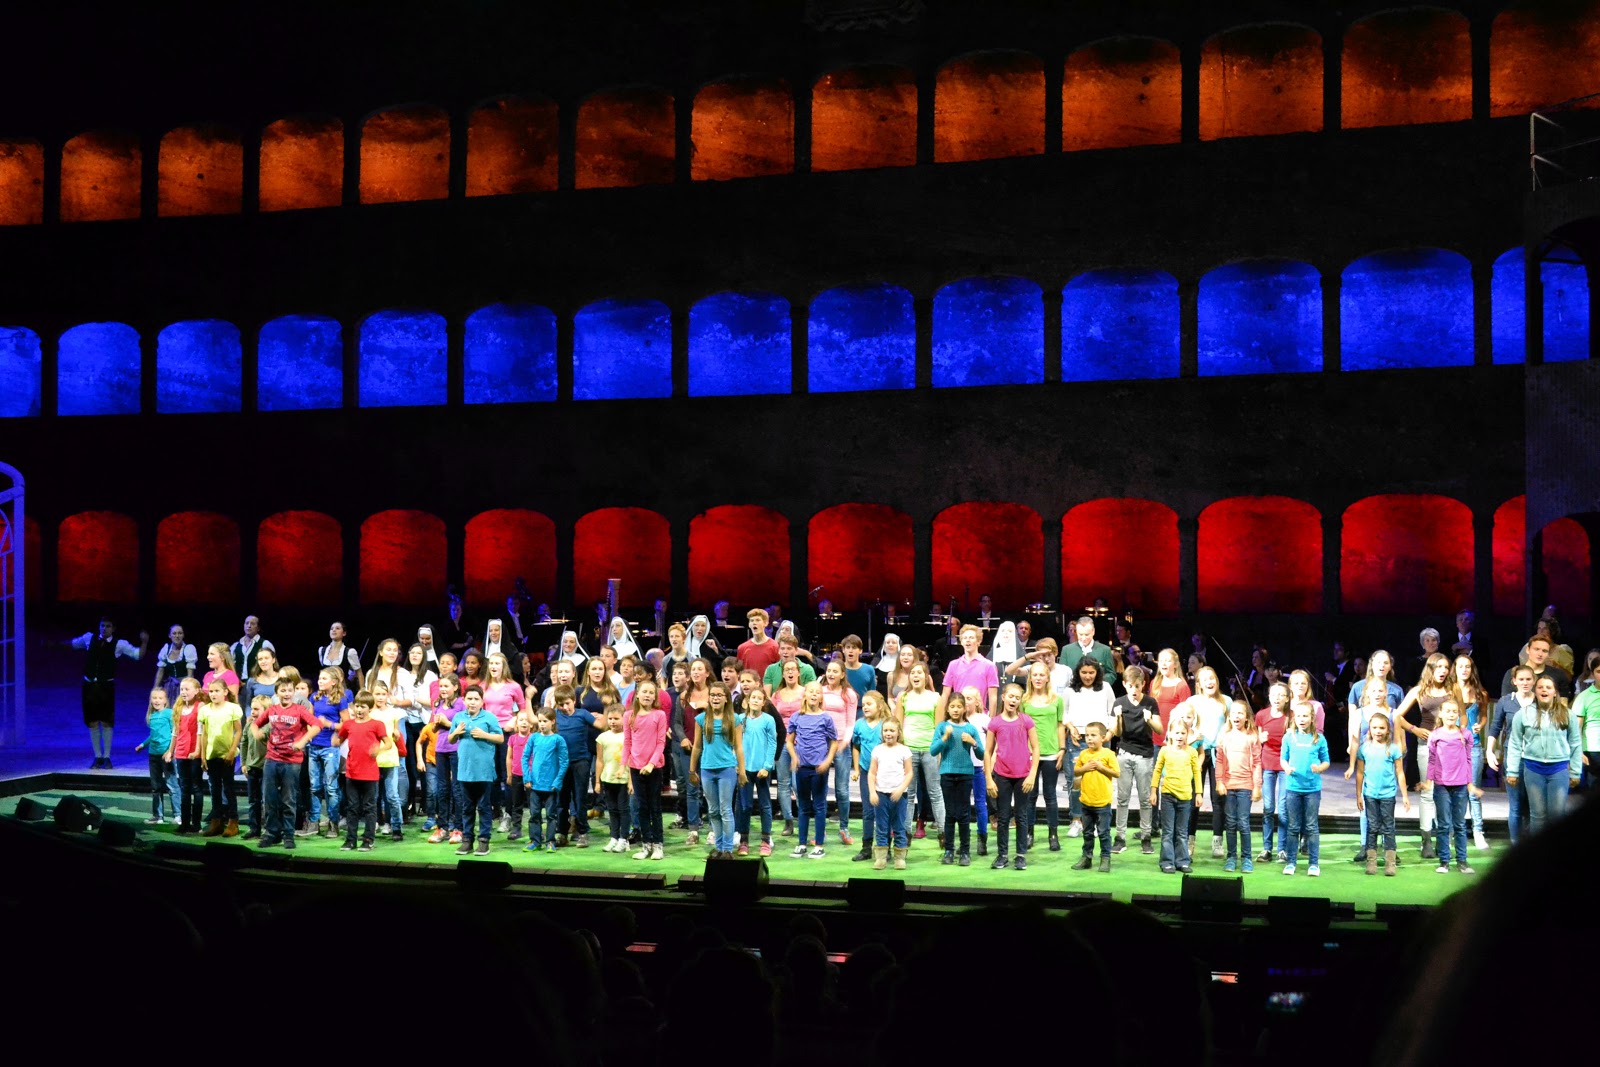 One of the highlights of the night was when 150 children, who previously auditioned for the gala, returned to perform in the finale 'Do-Re-Mi'!